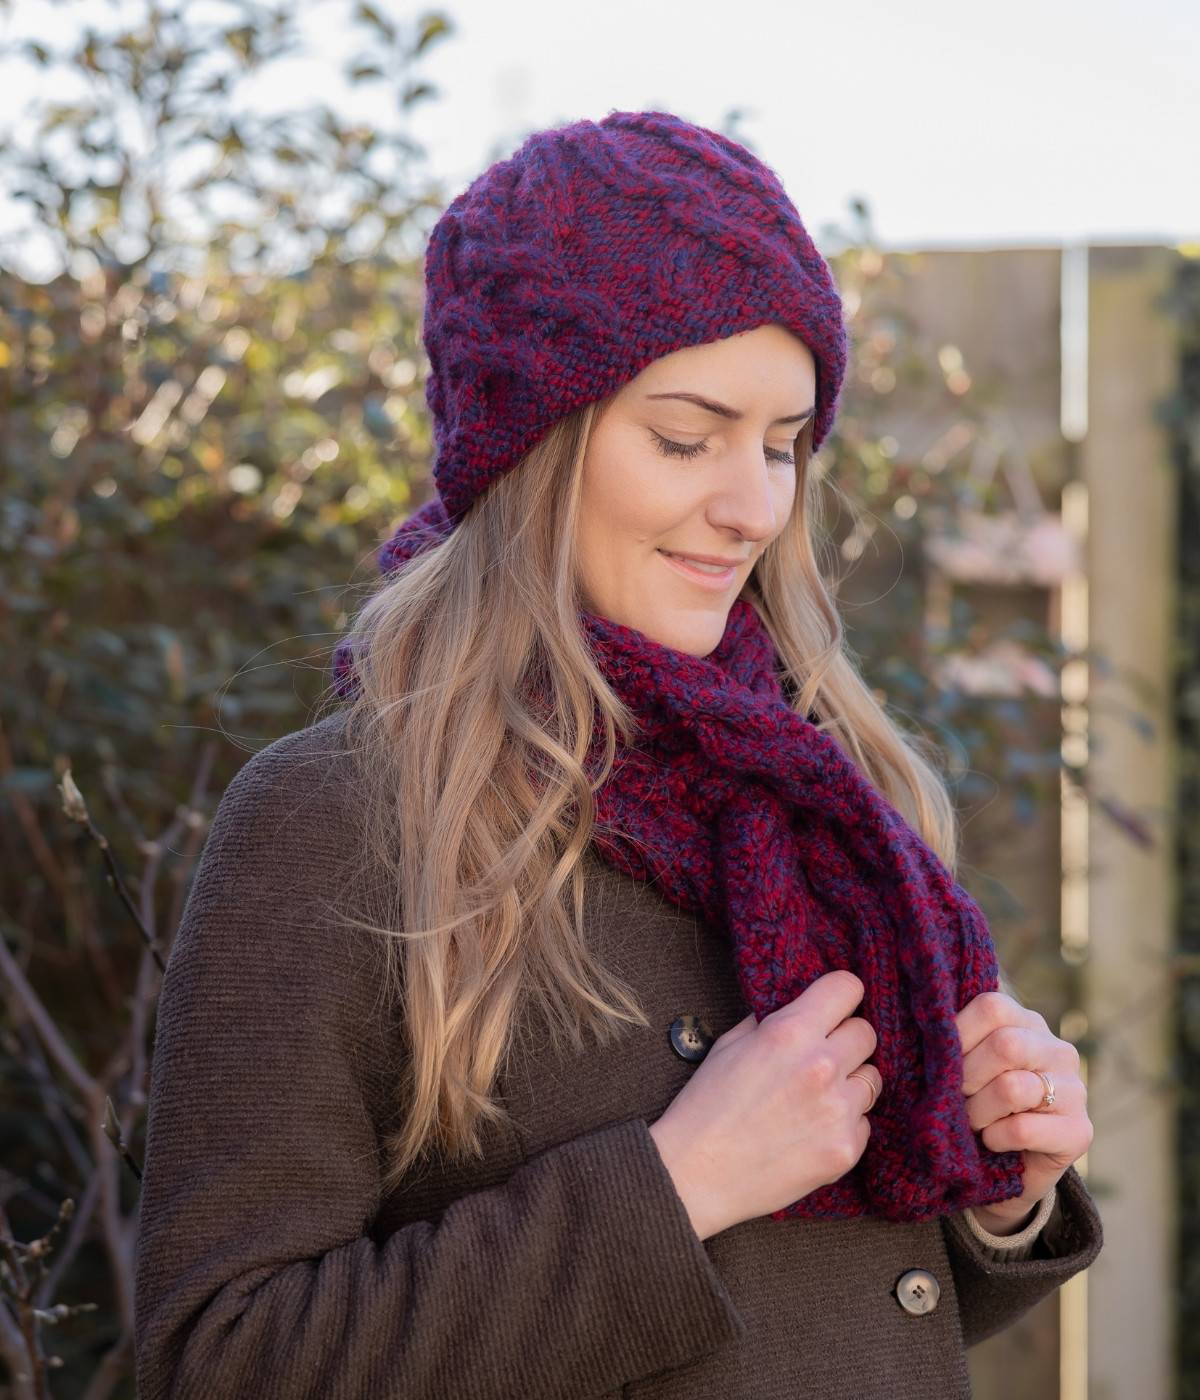 Womens Hat and Scarf in Athena Autumn Twist | The Knitting Network